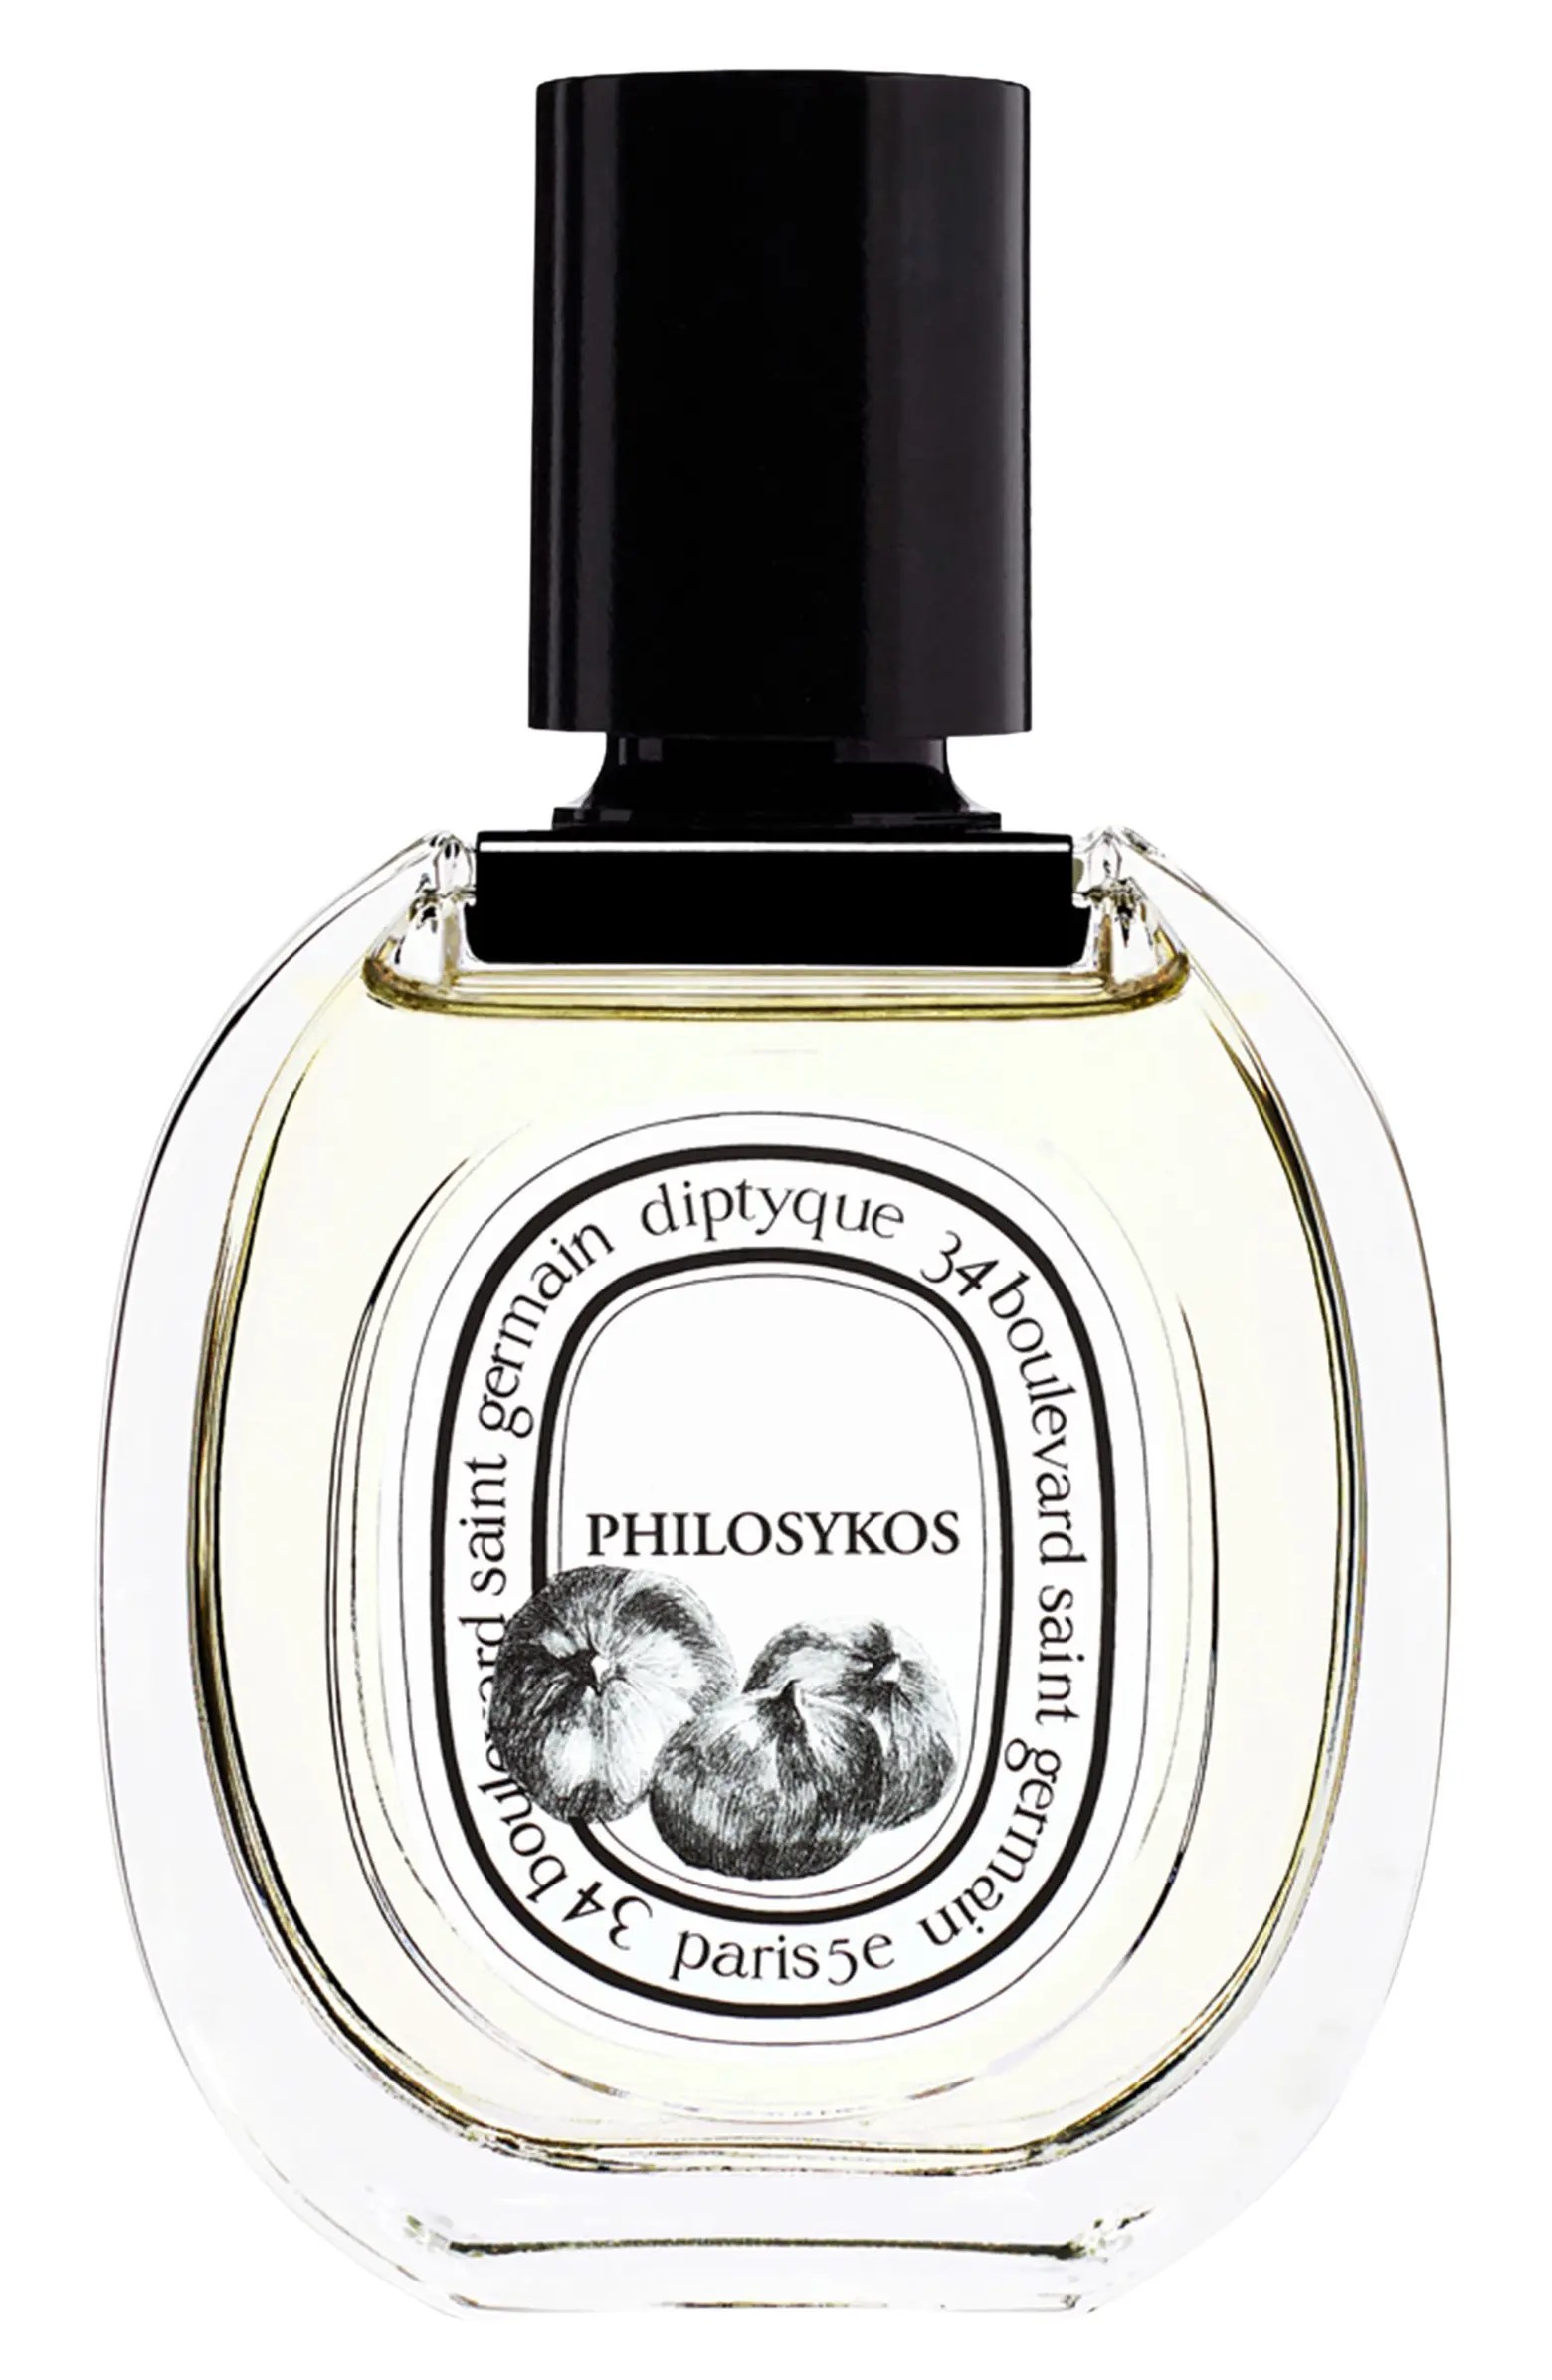 diptyque philosykos perfume, a vacation scent inspired by greece, on a white background.